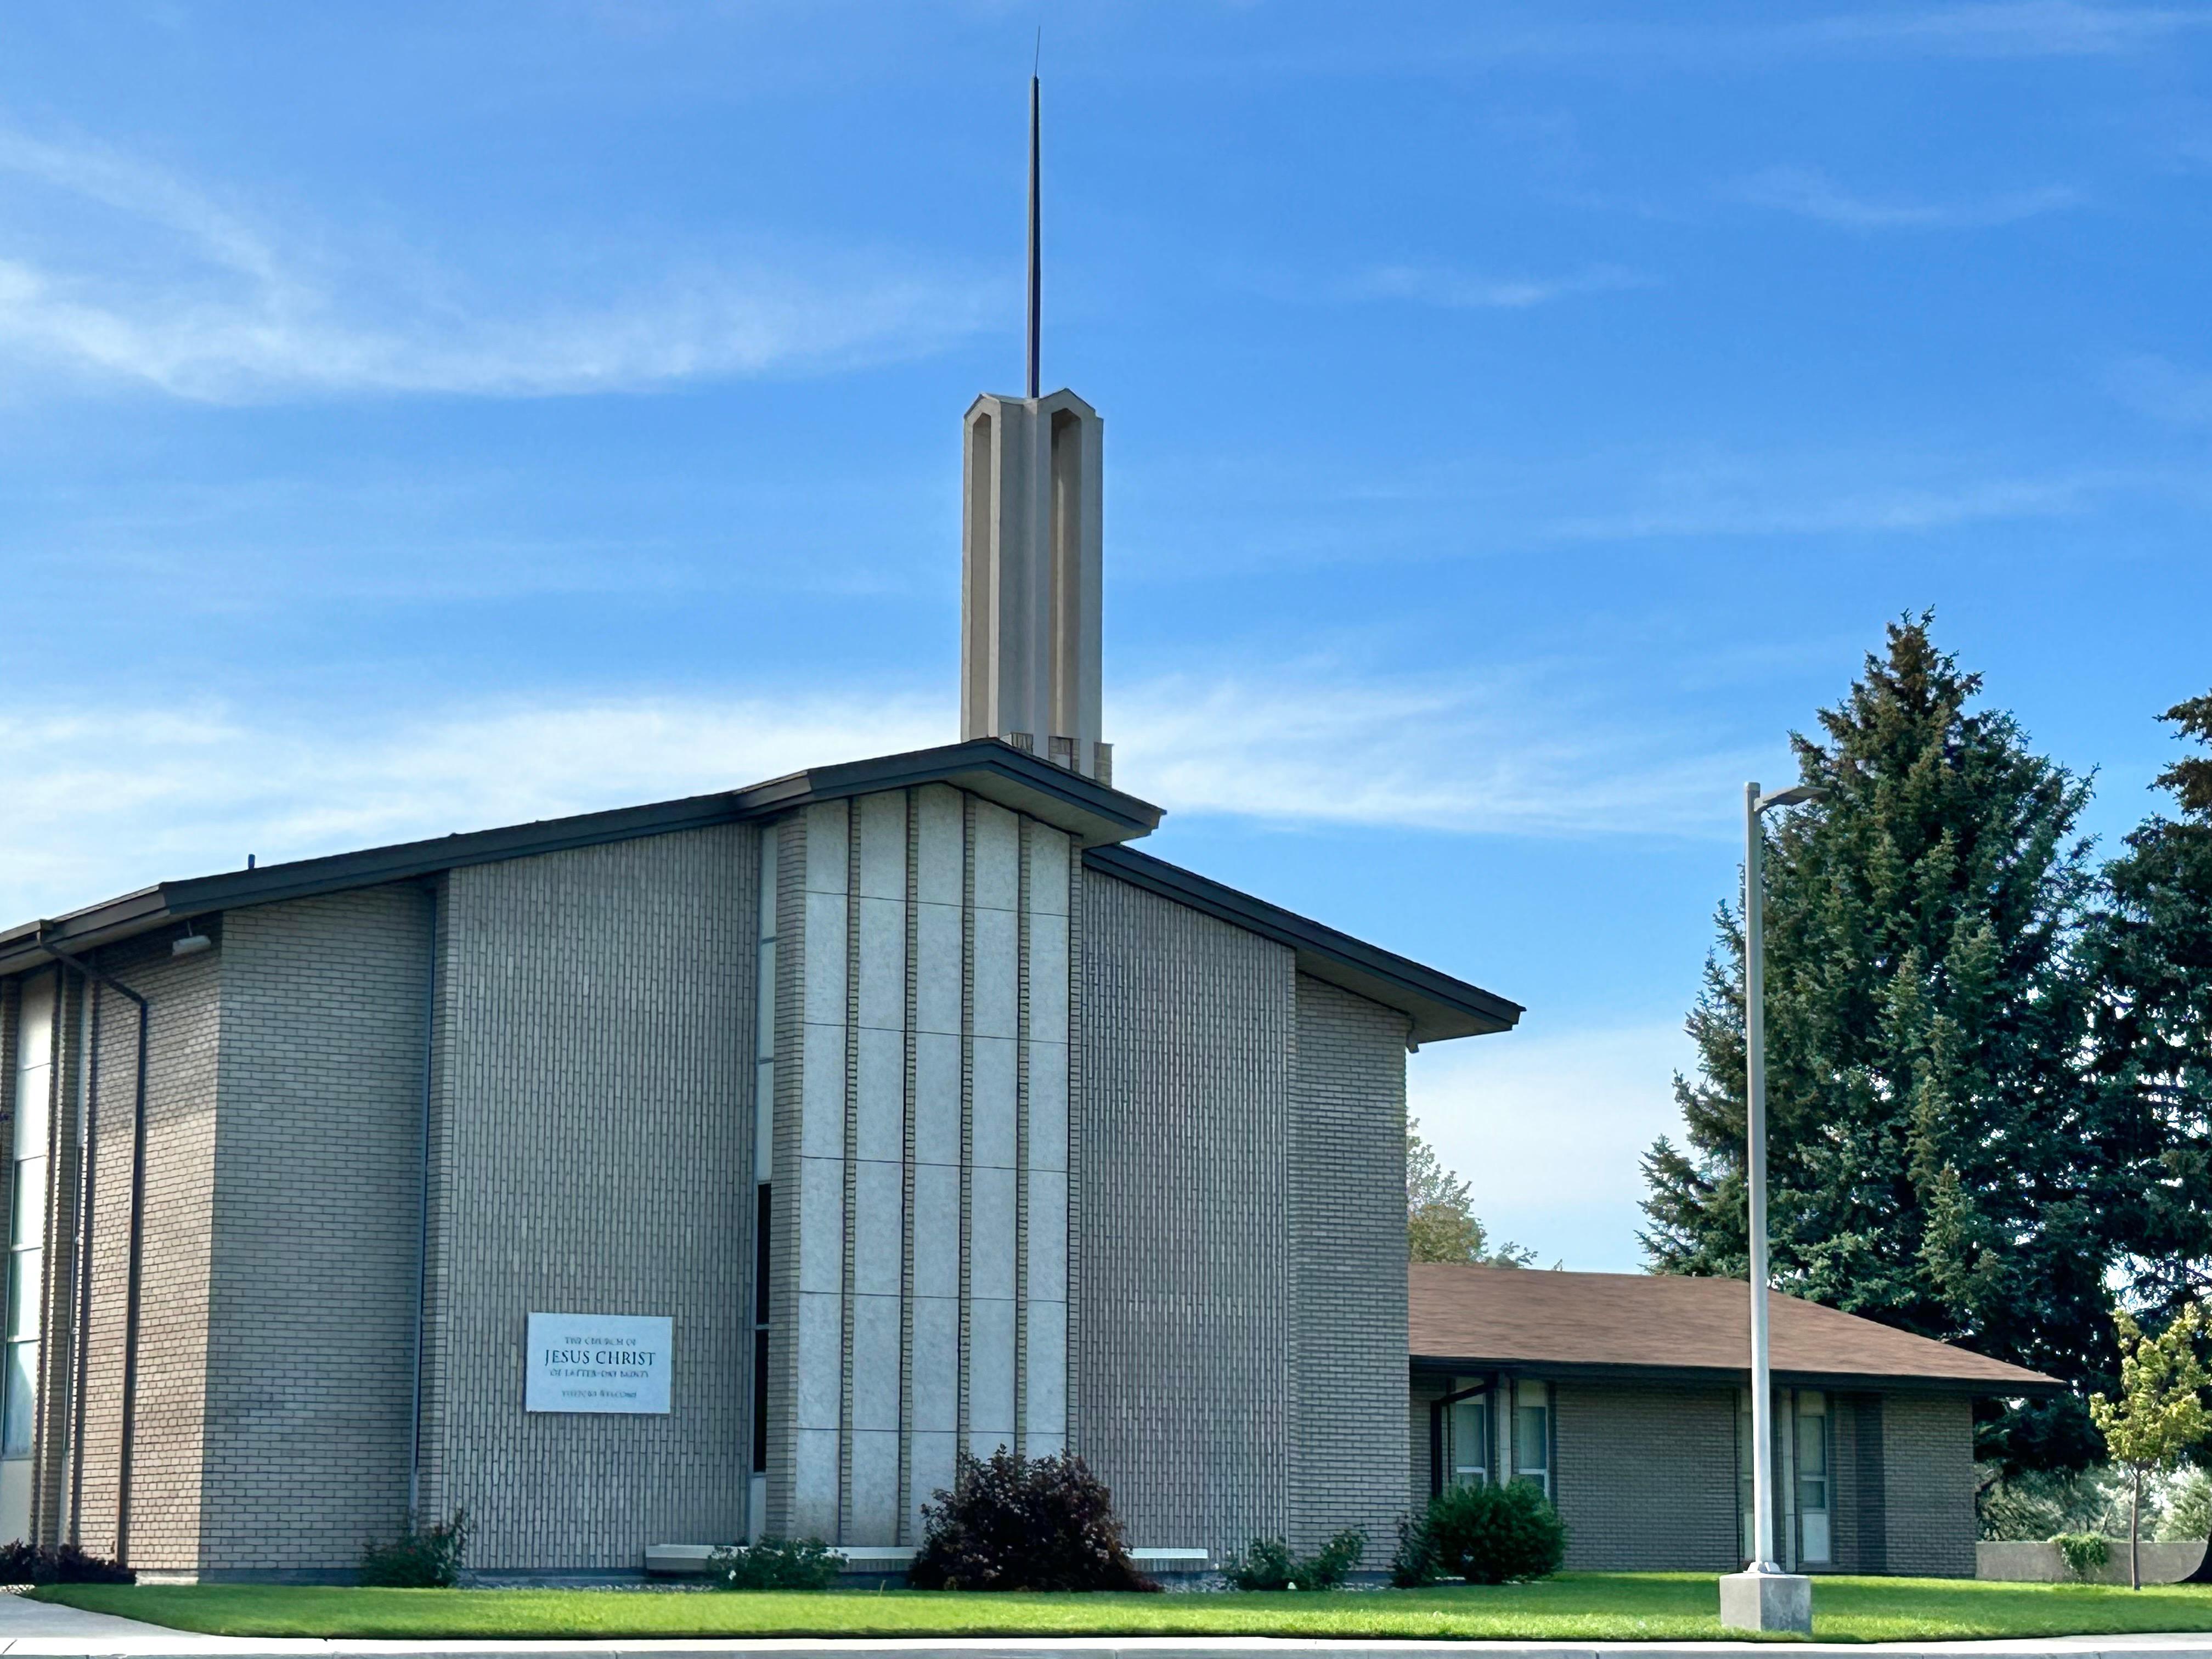 Outisde of the Fort Hall Building of The Church of Jesus Christ of Latter-Day Saints located at 333 South Treaty Hwy (US 91)
in Pocatello, ID.